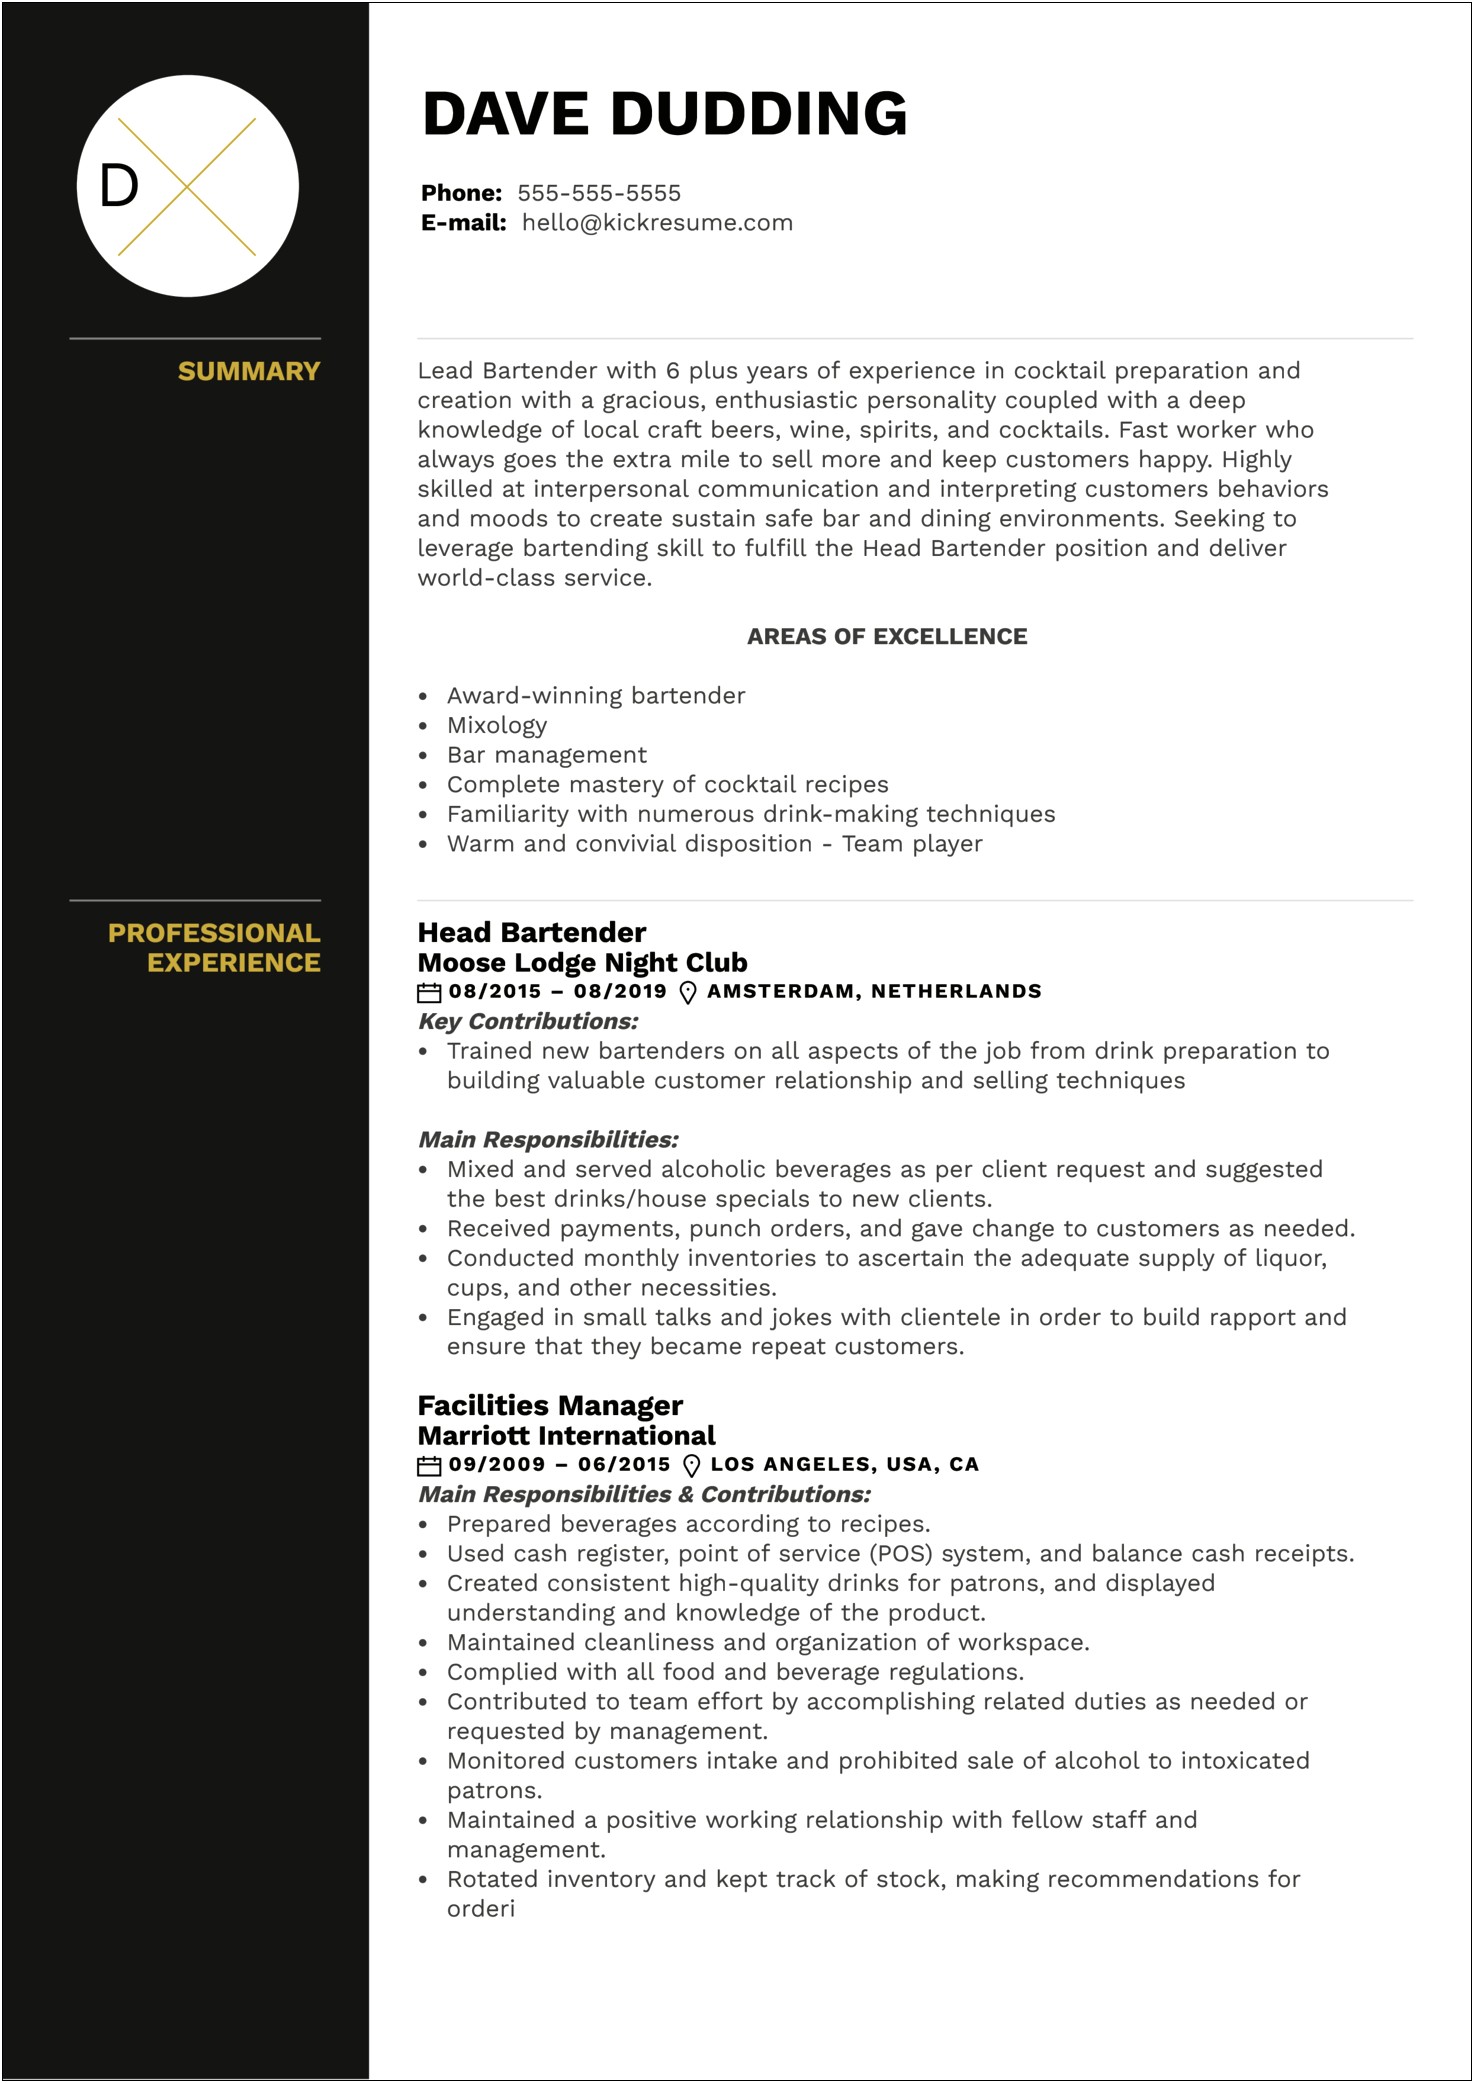 Resumes For Assistant Bar Managers